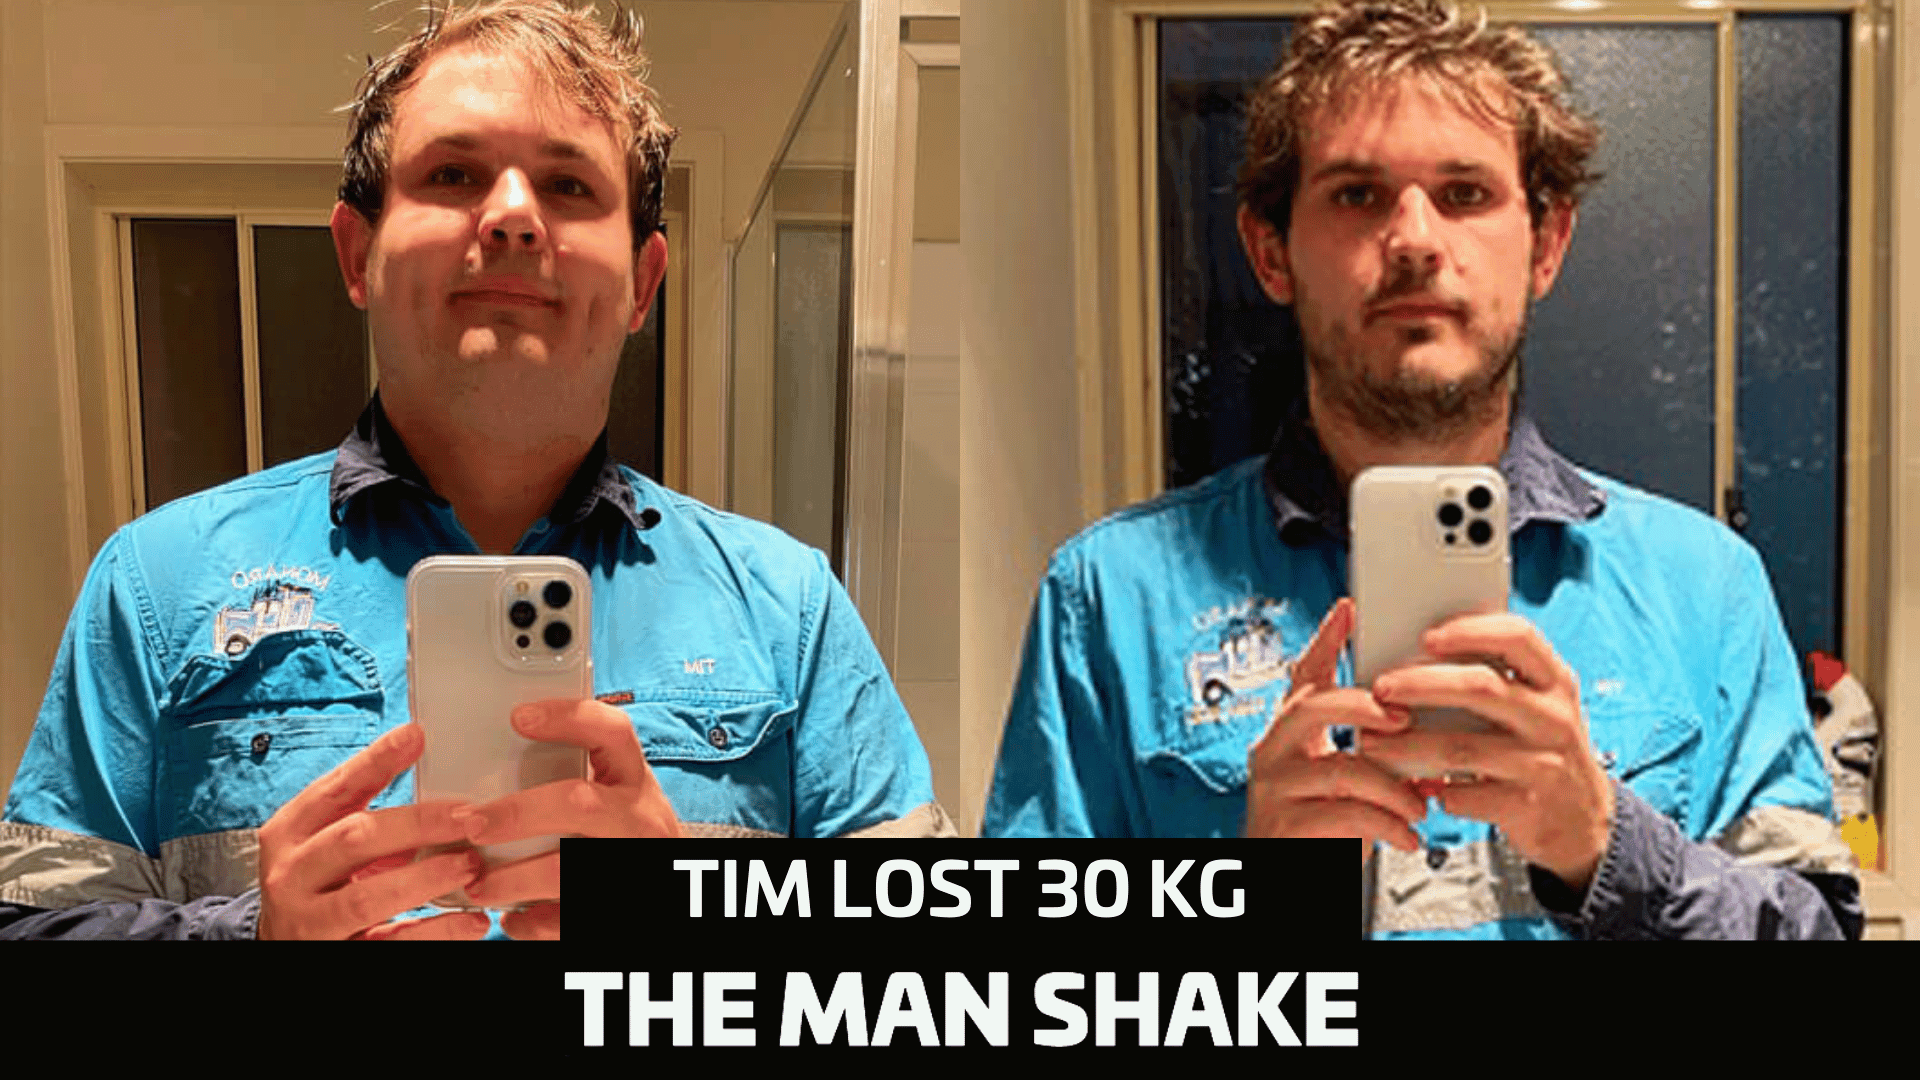 Tim turned everything around and lost 30kg